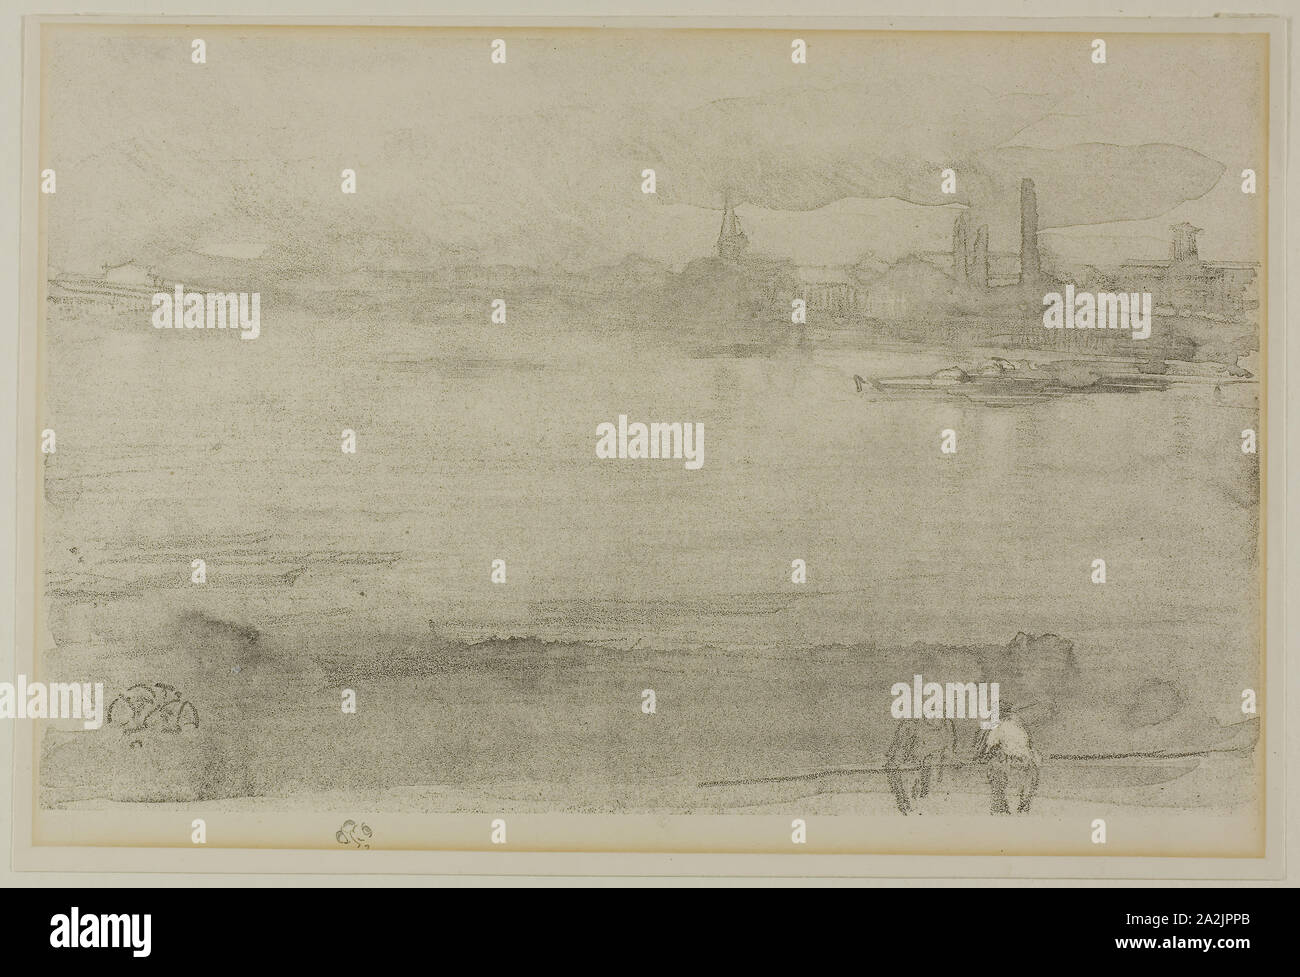 Early Morning, 1878, James McNeill Whistler, American, 1834-1903, United States, Lithotint in black ink with scraping, on a prepared half-tint ground, on cream wove paper, 165 x 259 mm (image), 183 x 271 mm (sheet Stock Photo